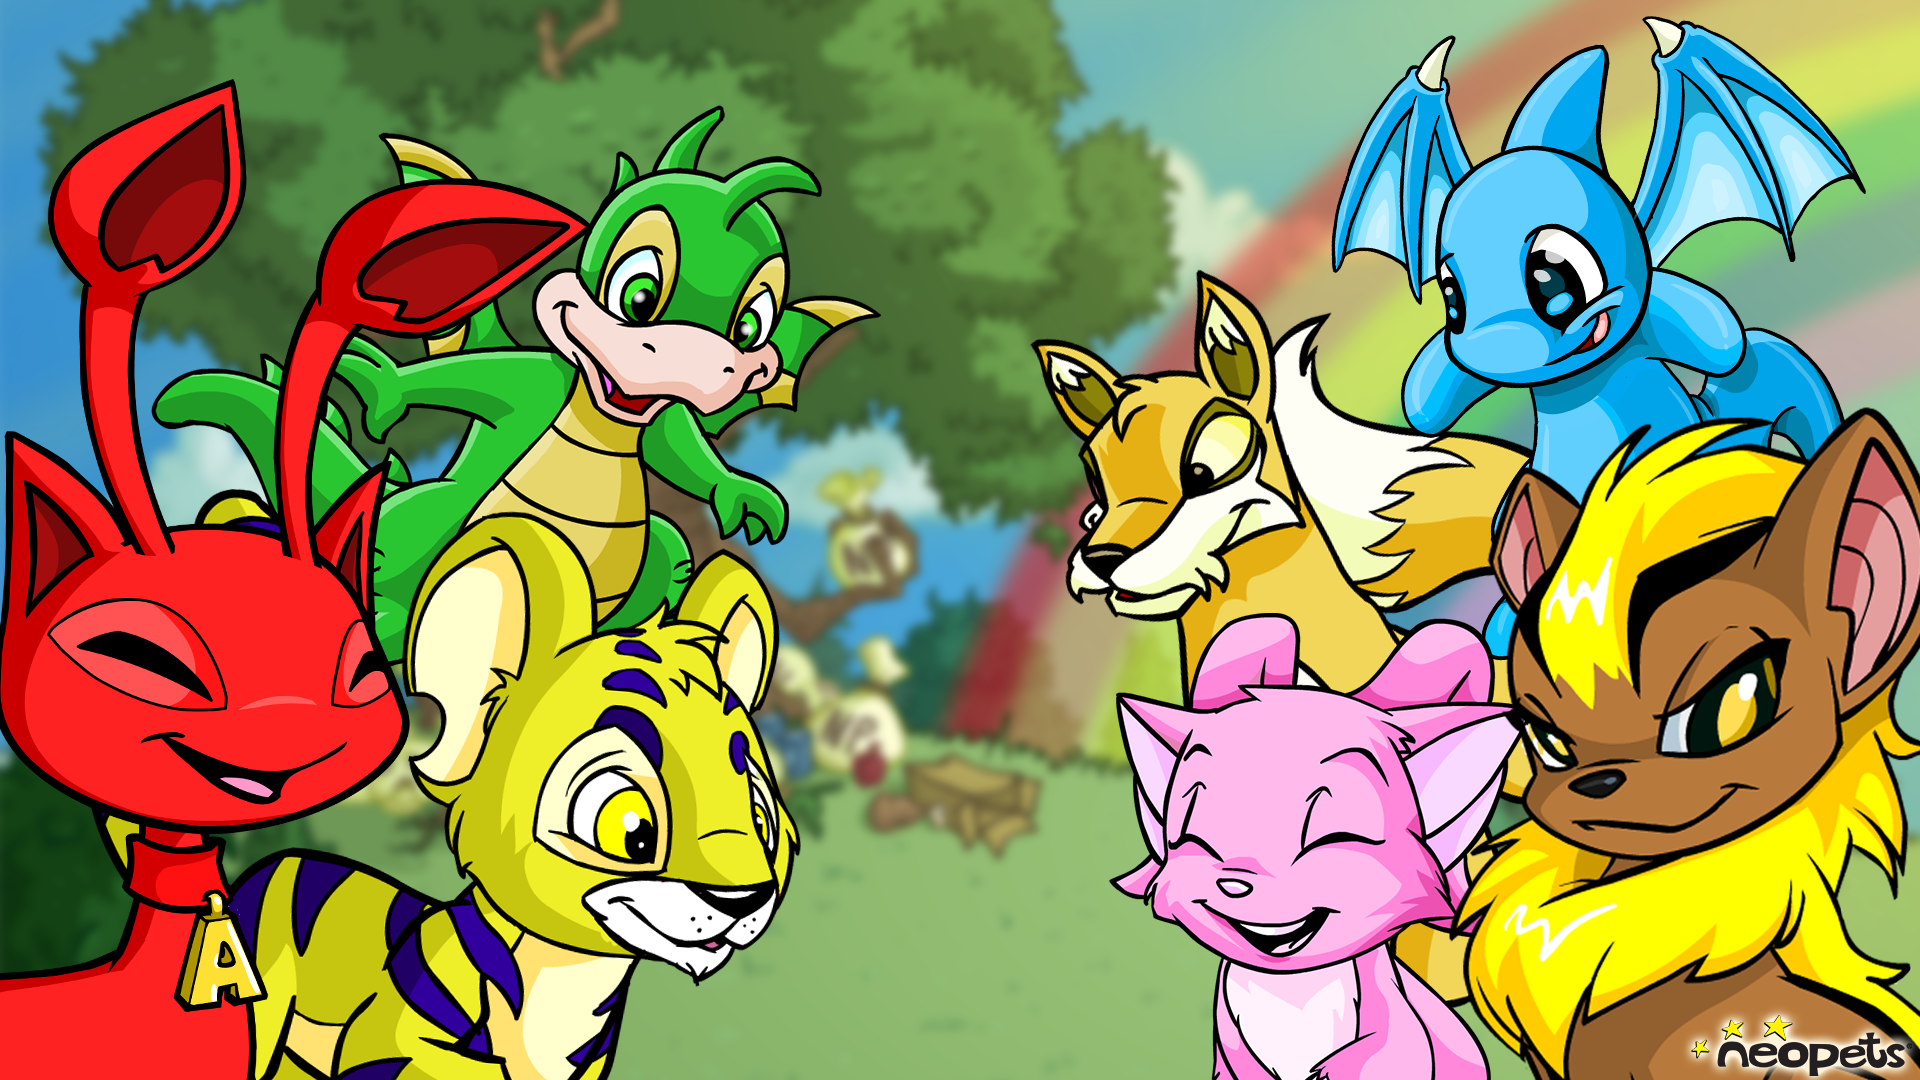 Neopets On Spice Up Your Next Zoom Video Chat With Some